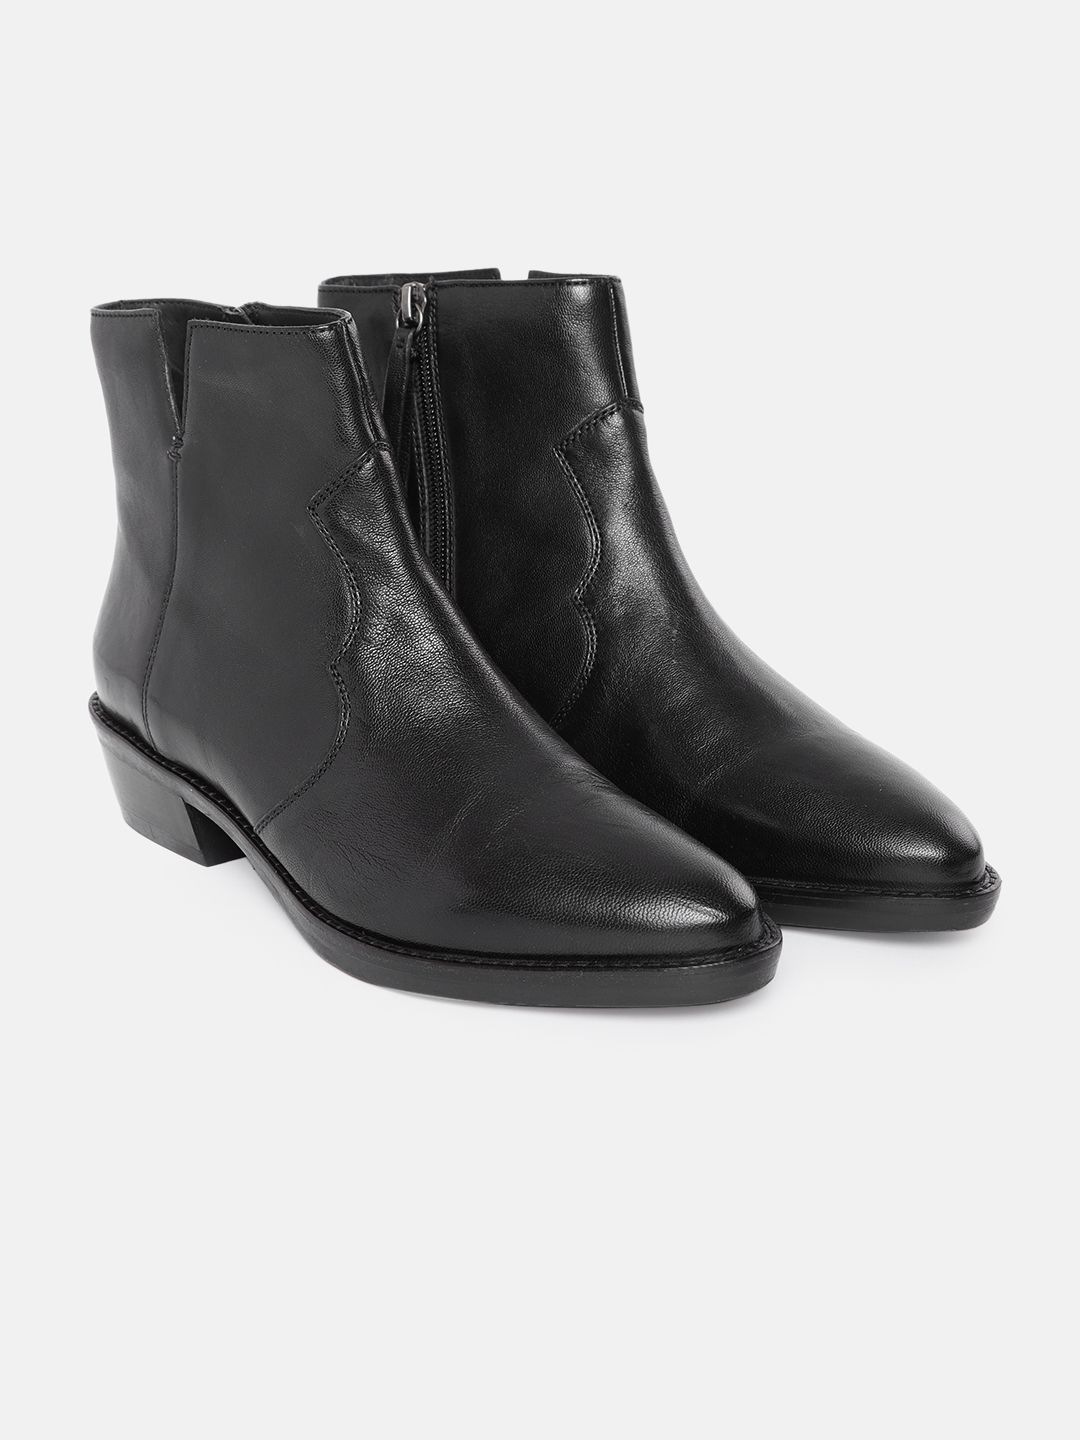 Geox Black Leather High-Top Platform Heeled Boots Price in India